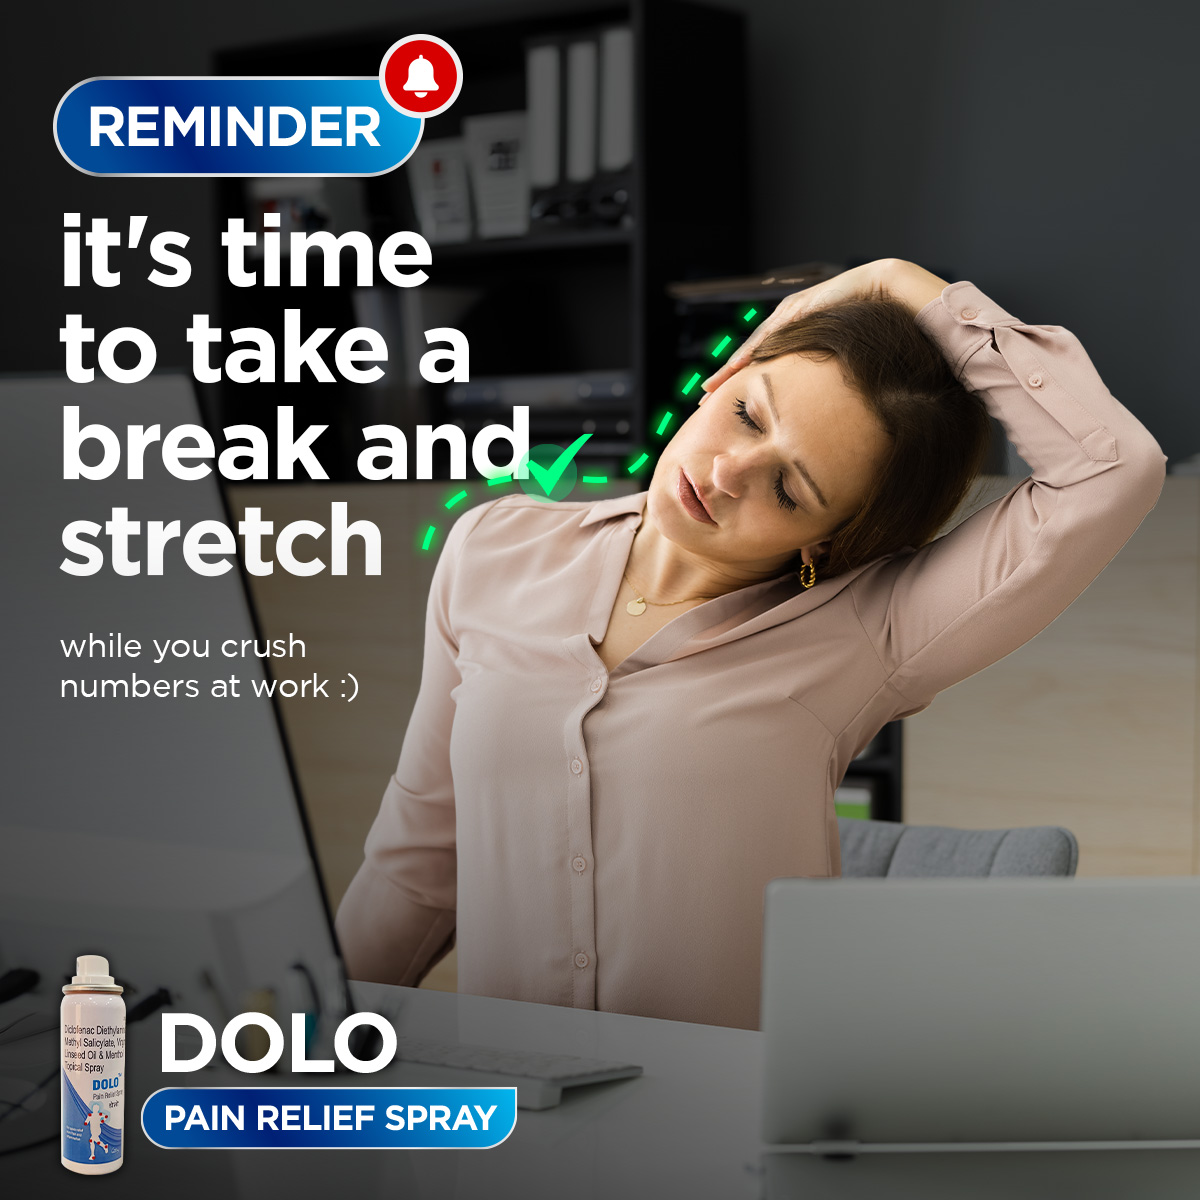 Don't let pain stop your hustle. Take a breath, stretch it out, and win at work

#PainIsTemporary #HustleHard #KeepPushing #TakeABreath #StretchItOut #WorkWins #WorkLifeBalance #SuccessMindset #MicroWellness #Microlabs #DoloPainReliefSpray